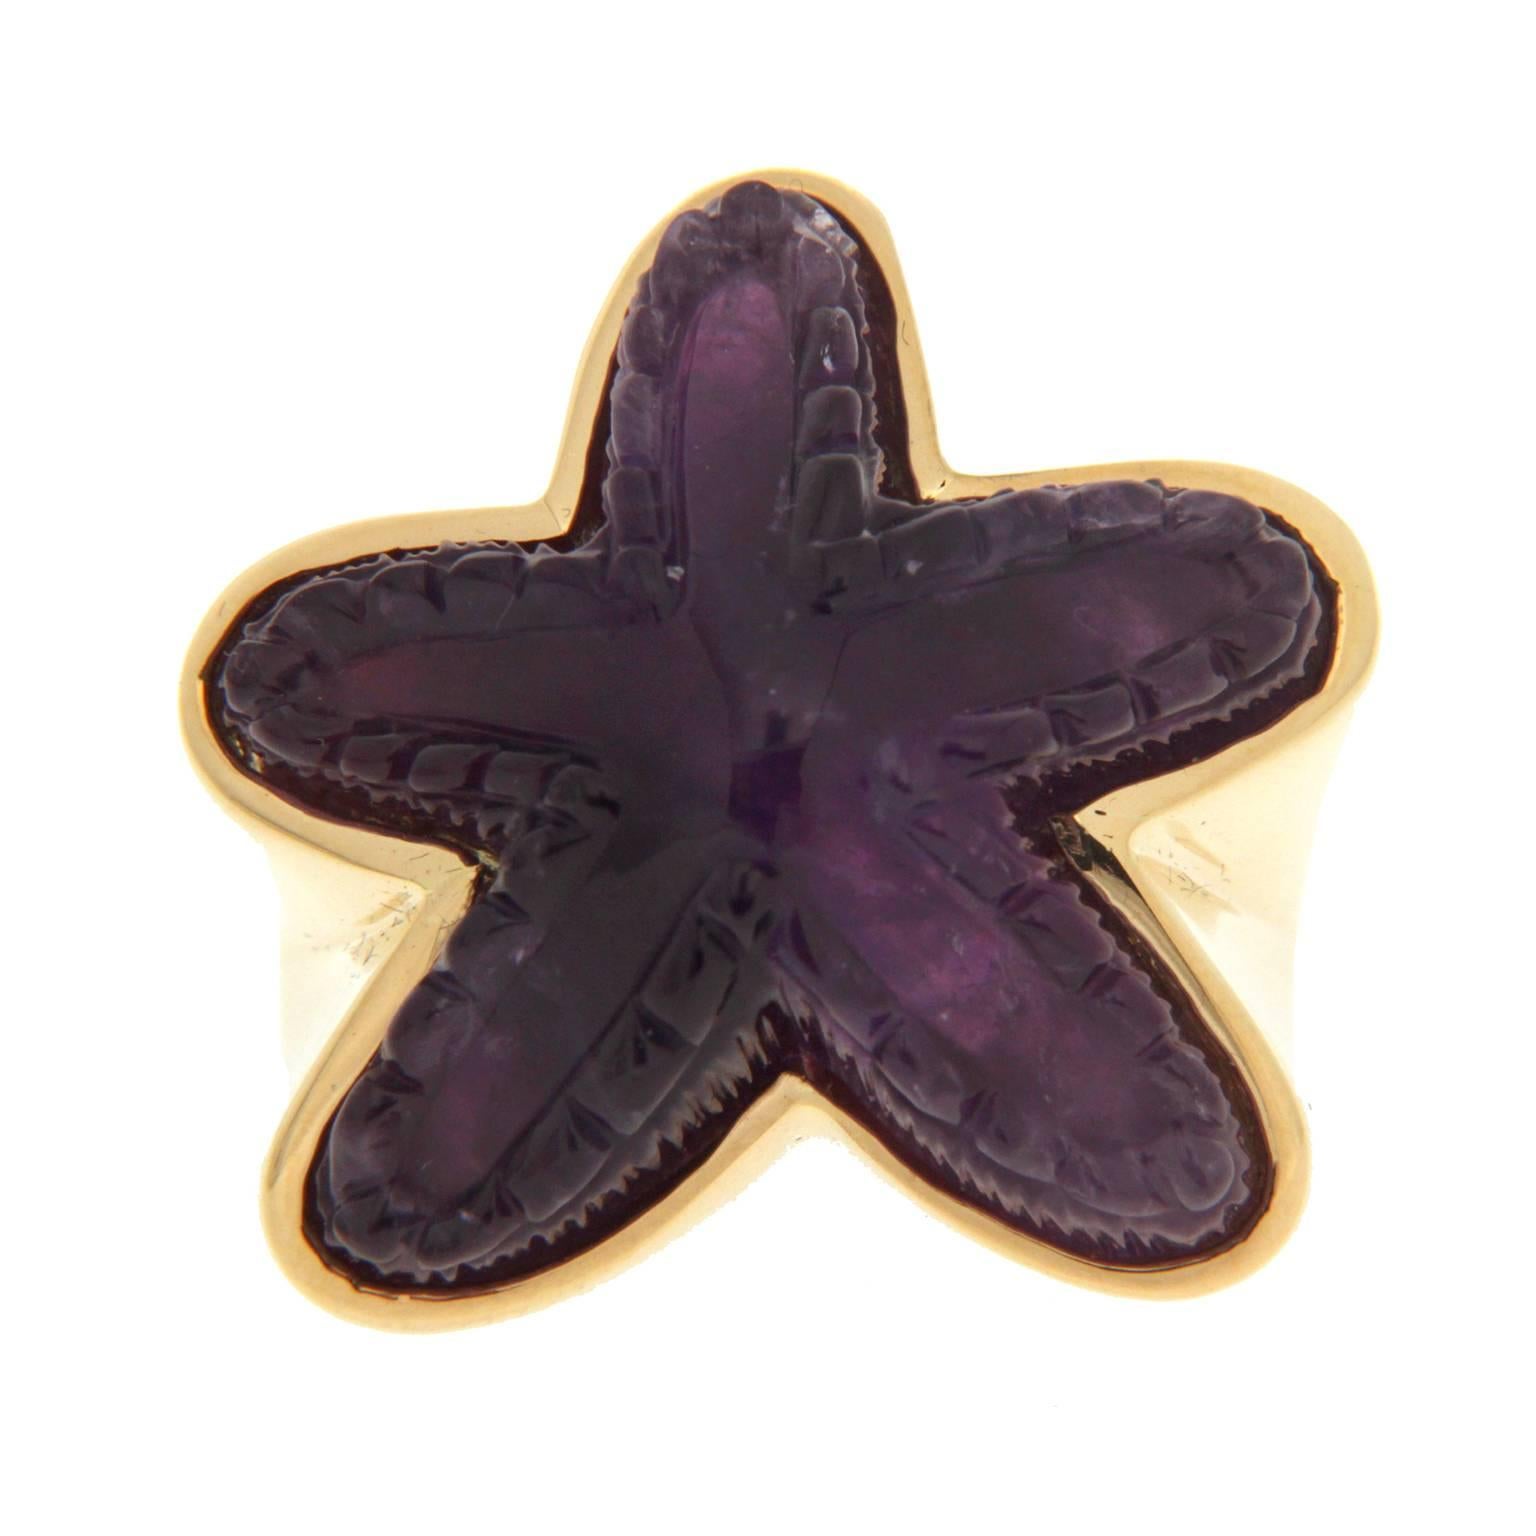 This one of a kind ring is made in 18kt yellow gold, it features a special cut starfish amethyst stone.